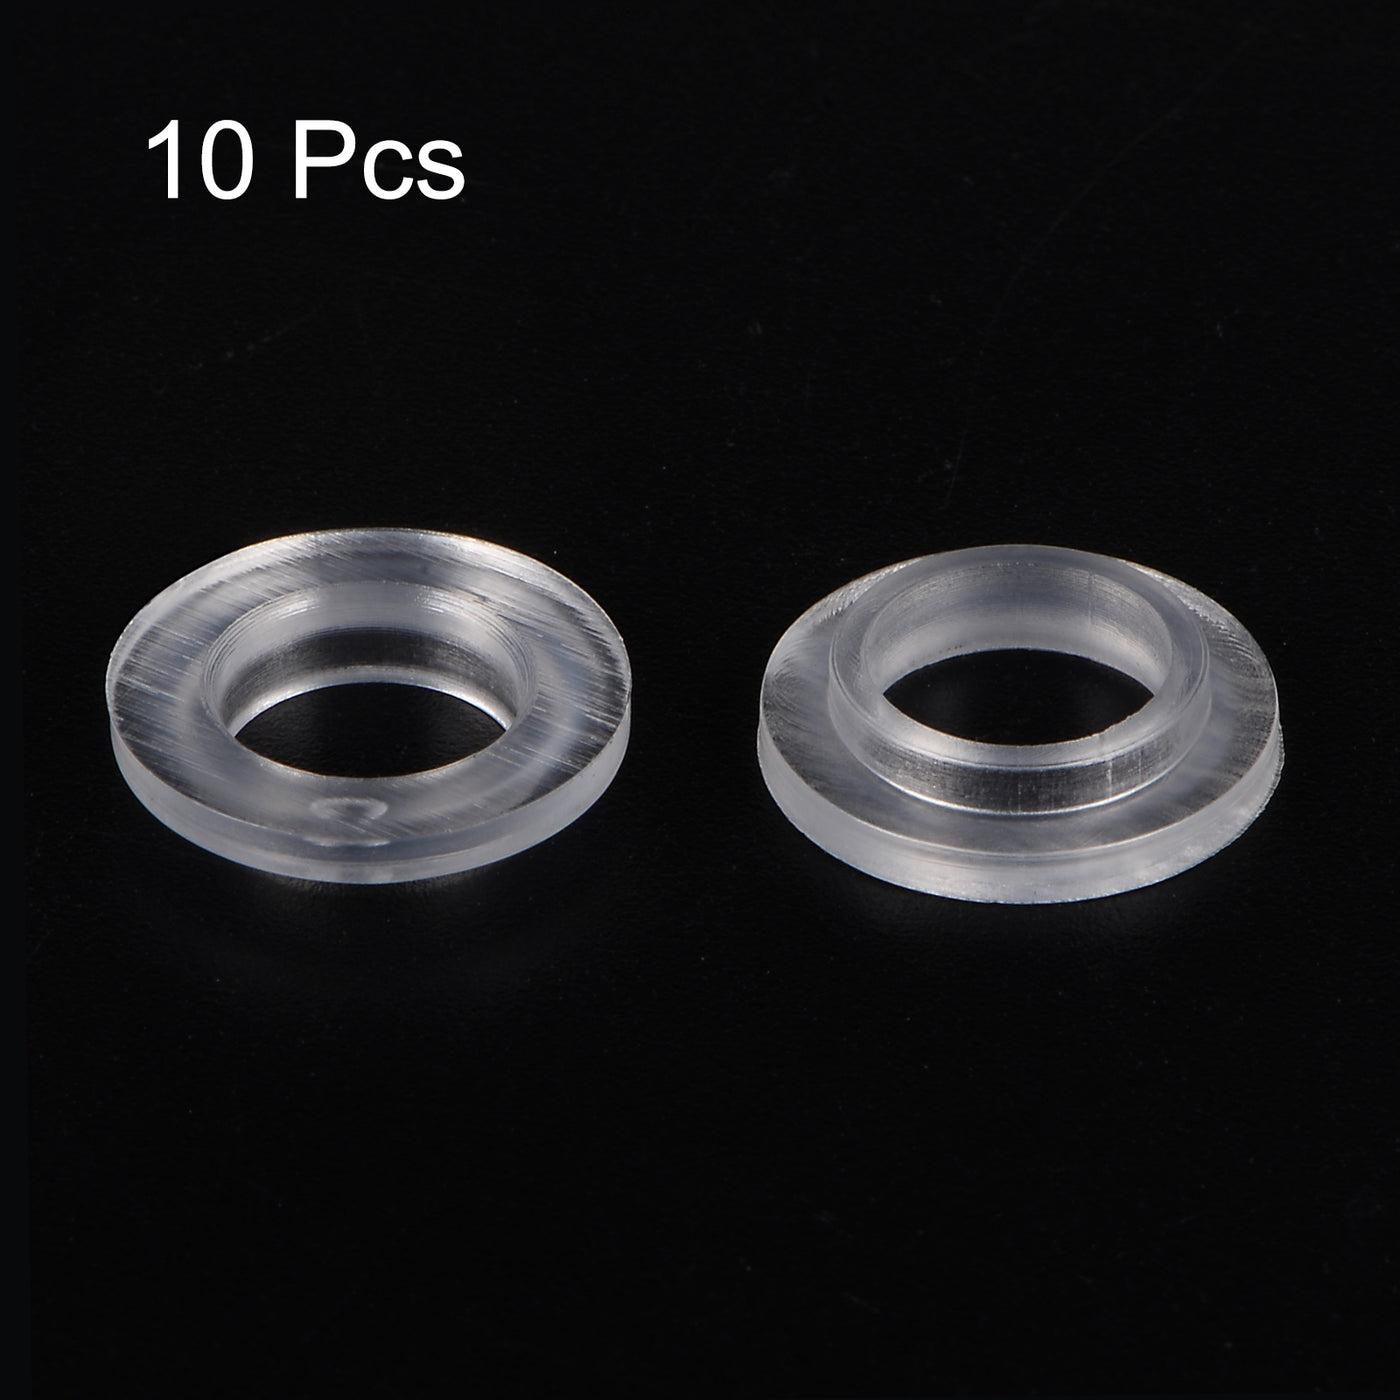 uxcell Uxcell 10pcs Flanged Nylon Bushings 8.1mm ID 10.1mm OD 3.1mm Length, Translucent